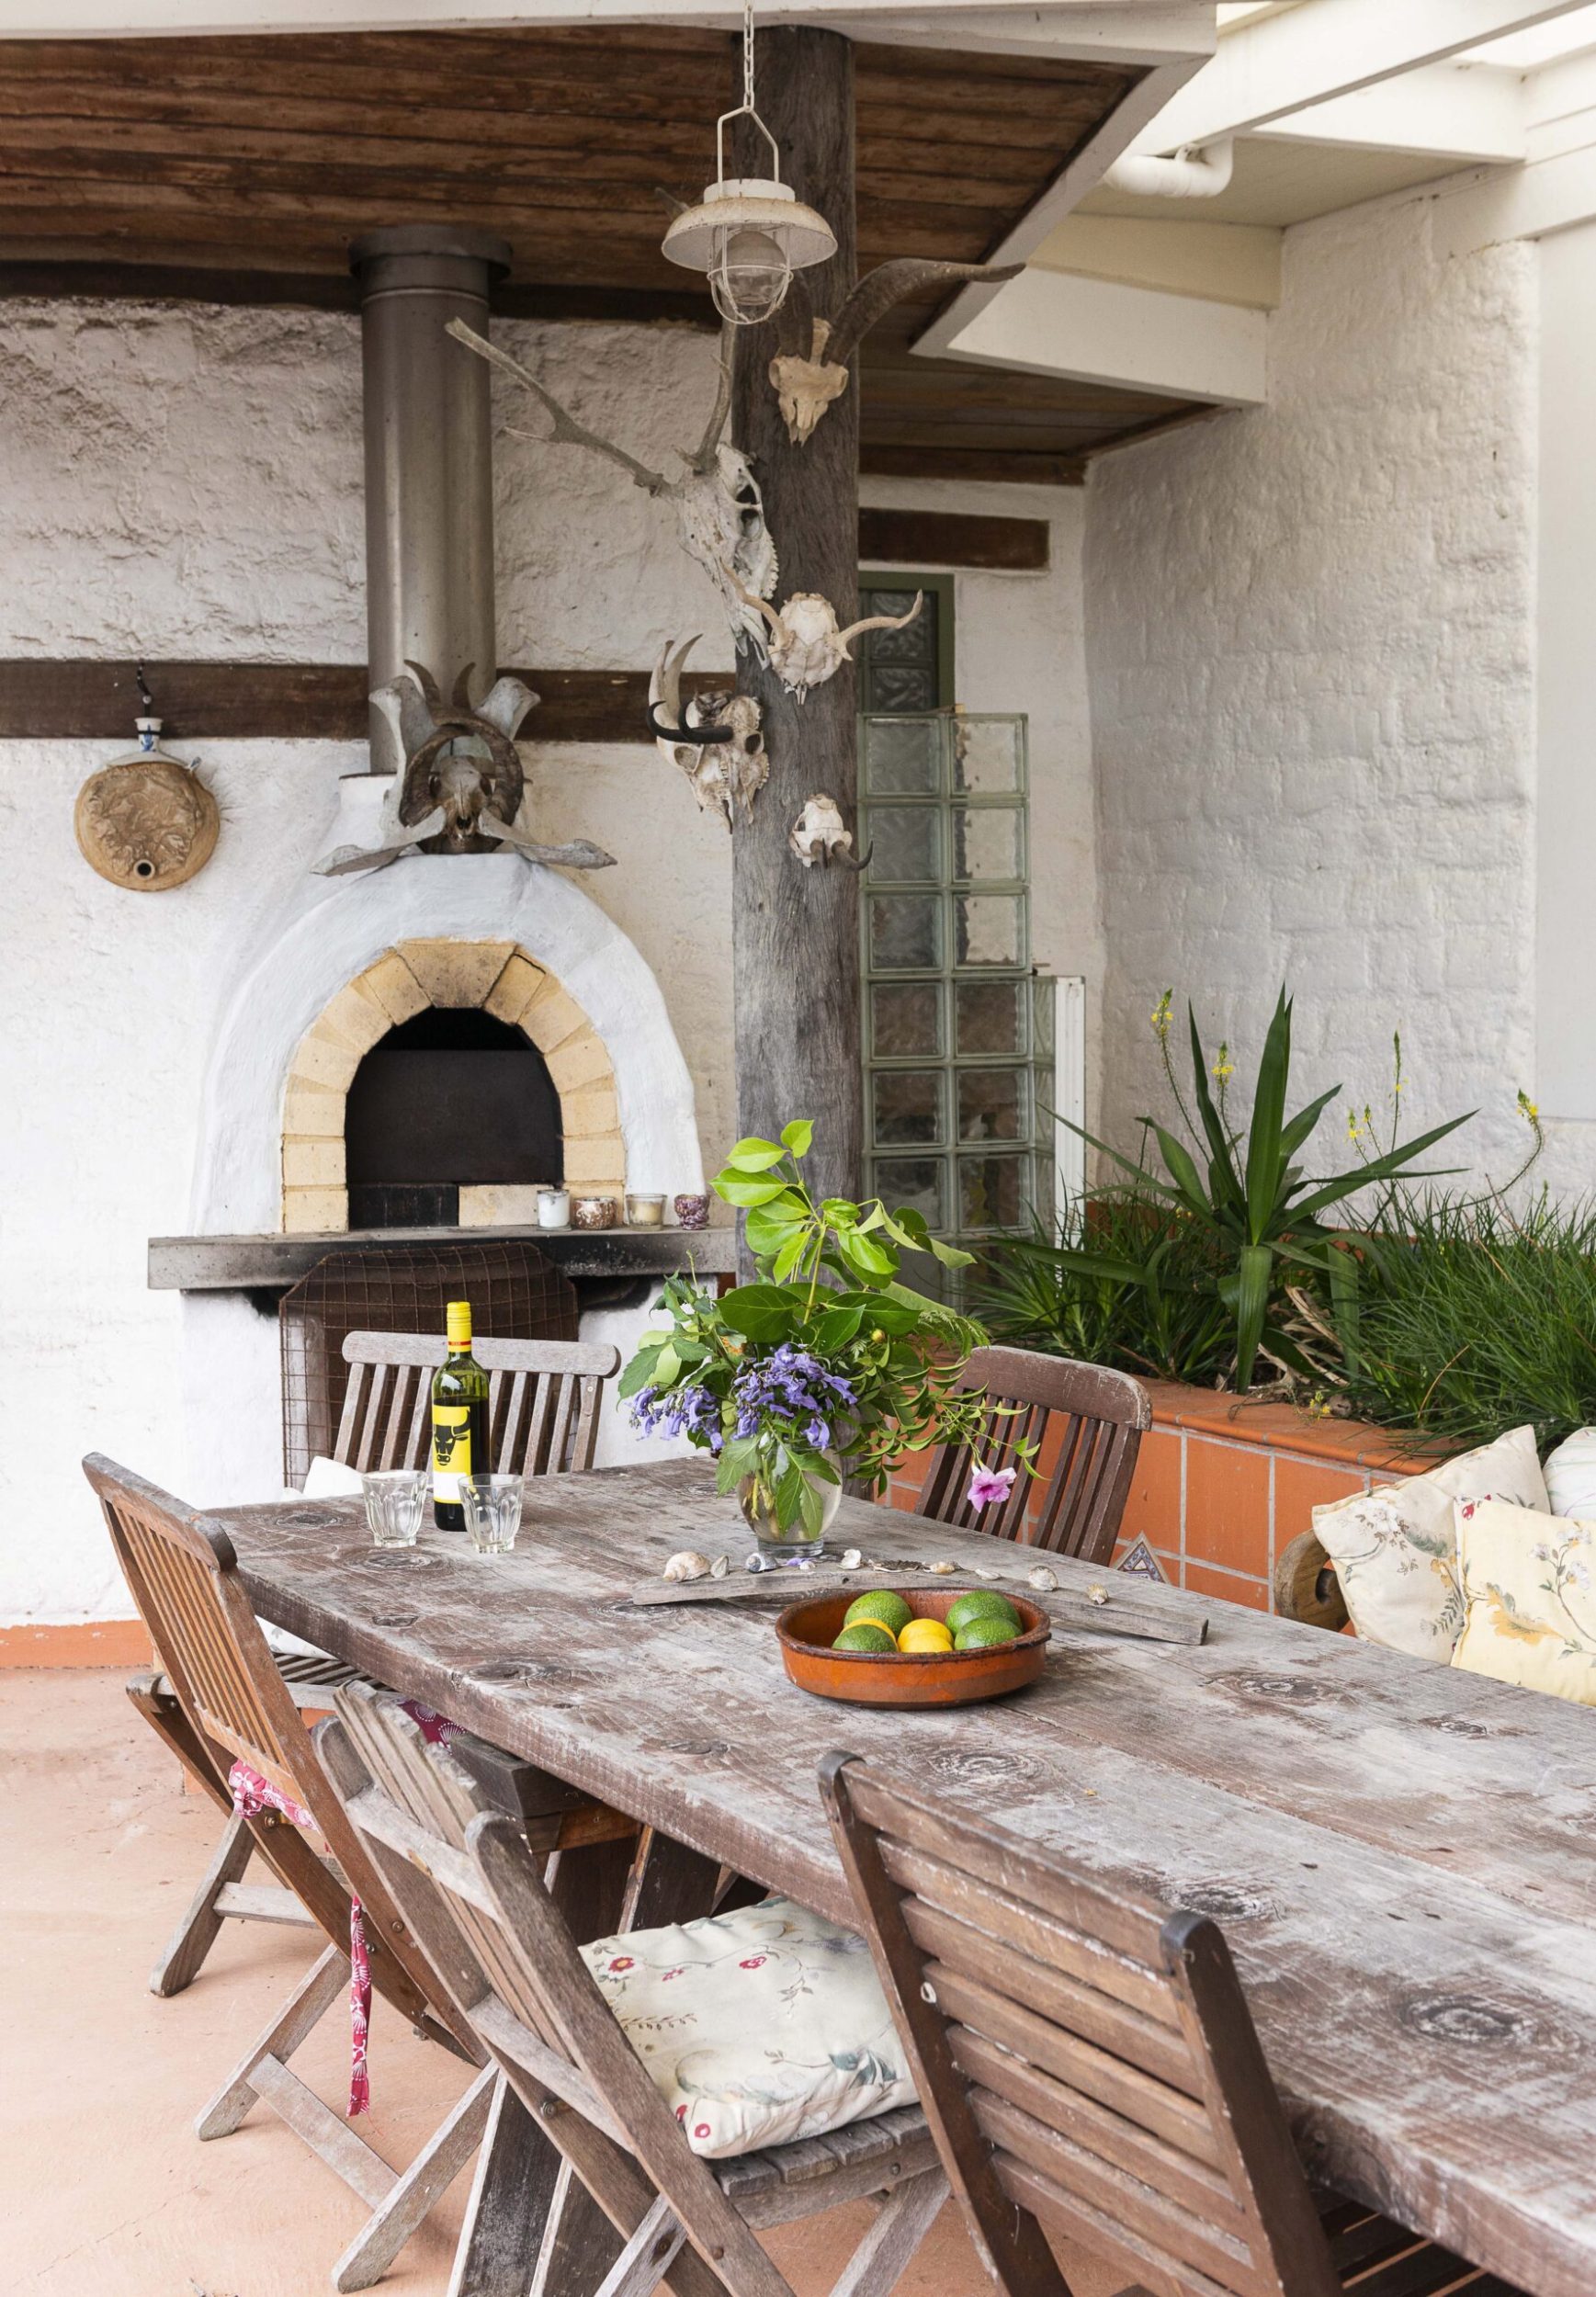 An outdoor living area with a pizza oven, a rustic brown table and greenery